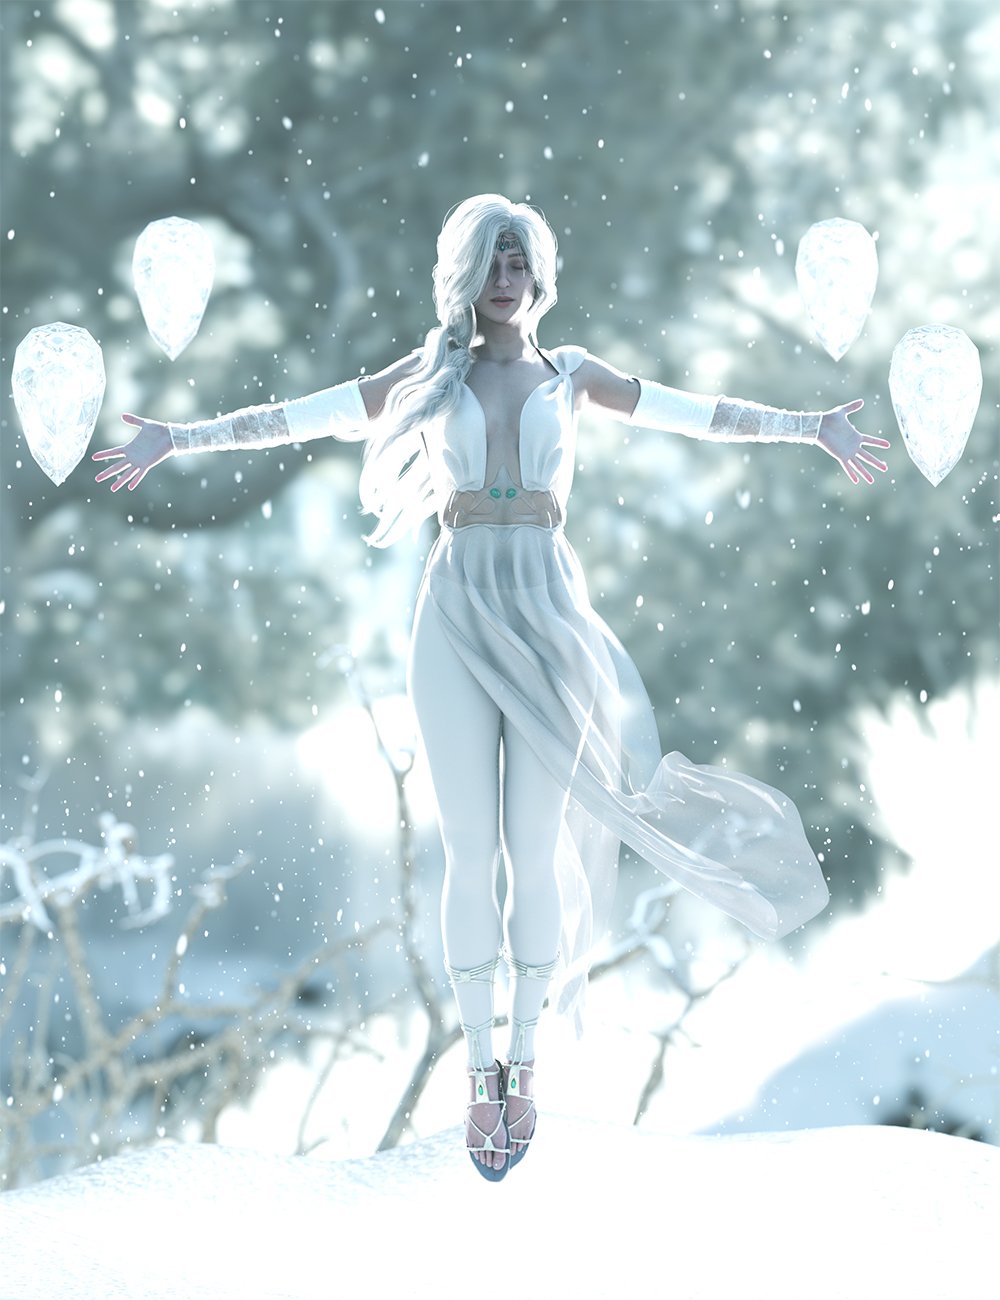 Best photo poses for winter photoshoots - tosomeplacenew